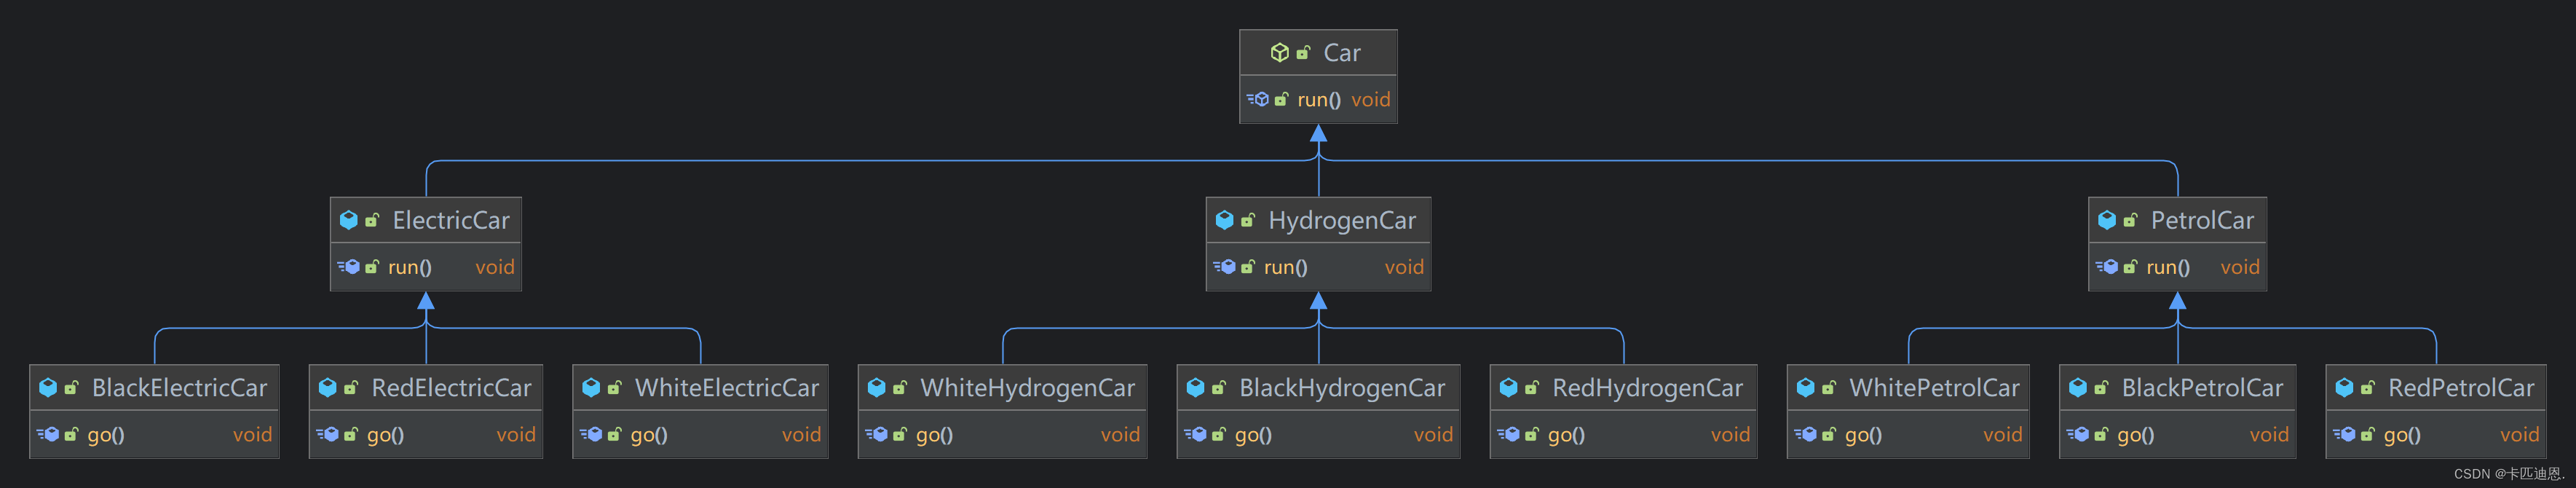 Inheritance and reuse-new hydrogen energy vehicle class